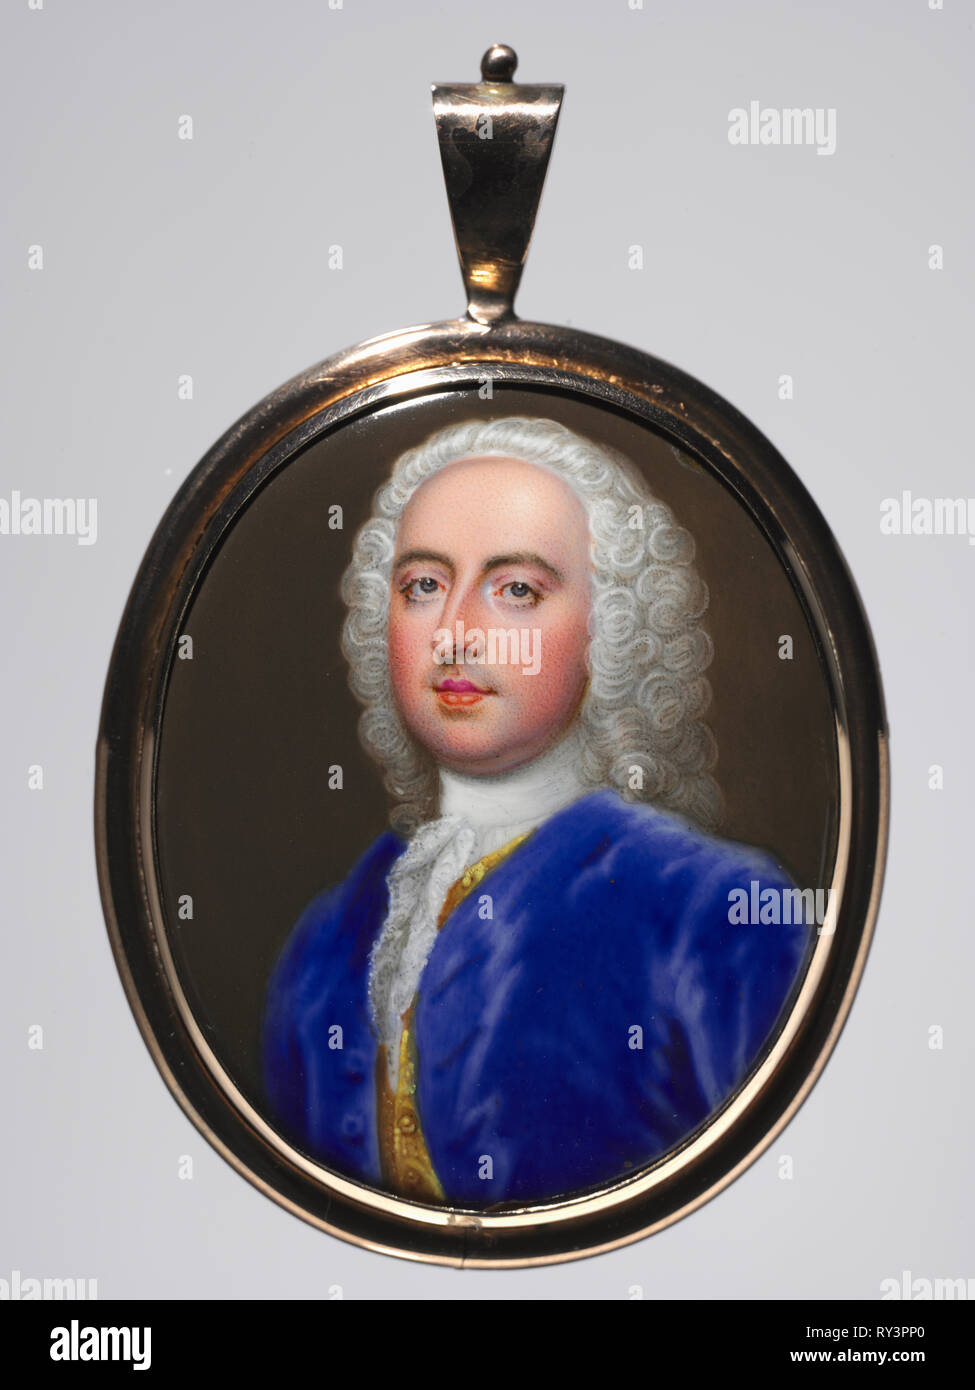 Portrait of a Man, c. 1735. Christian Friedrich Zincke (German, 1683/85-1767). Enamel on copper in a gold frame with a blue glass and hair reverse; framed: 5.1 x 4.3 cm (2 x 1 11/16 in.); unframed: 4.5 x 3.6 cm (1 3/4 x 1 7/16 in Stock Photo